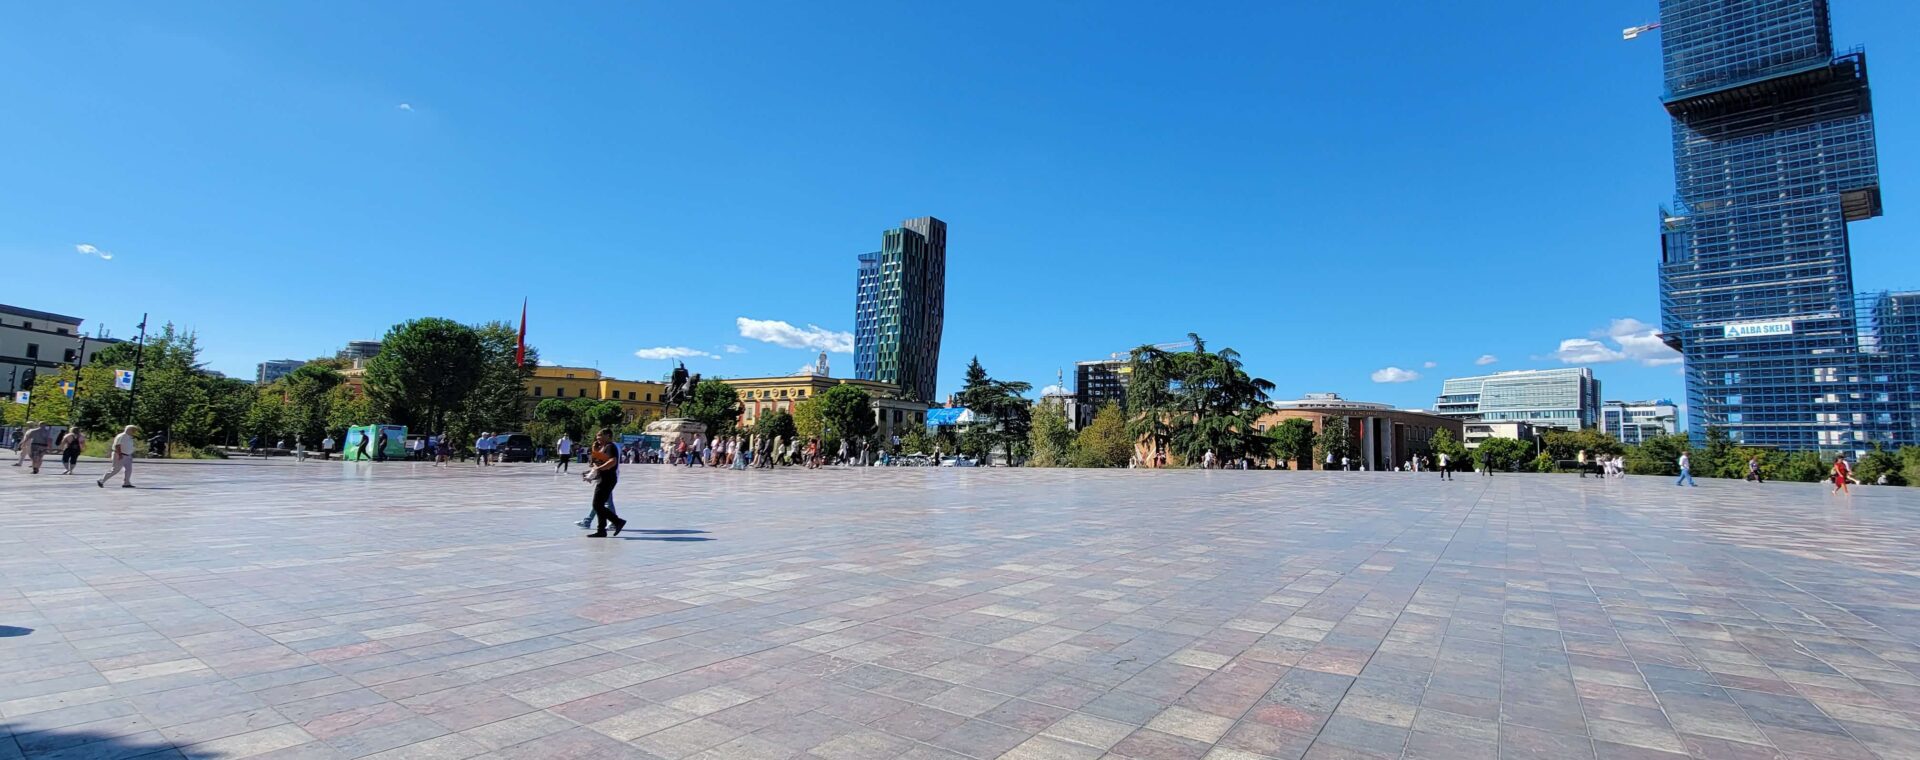 Skanderbeg Square in Tirana, Albania is one of the best things to do.